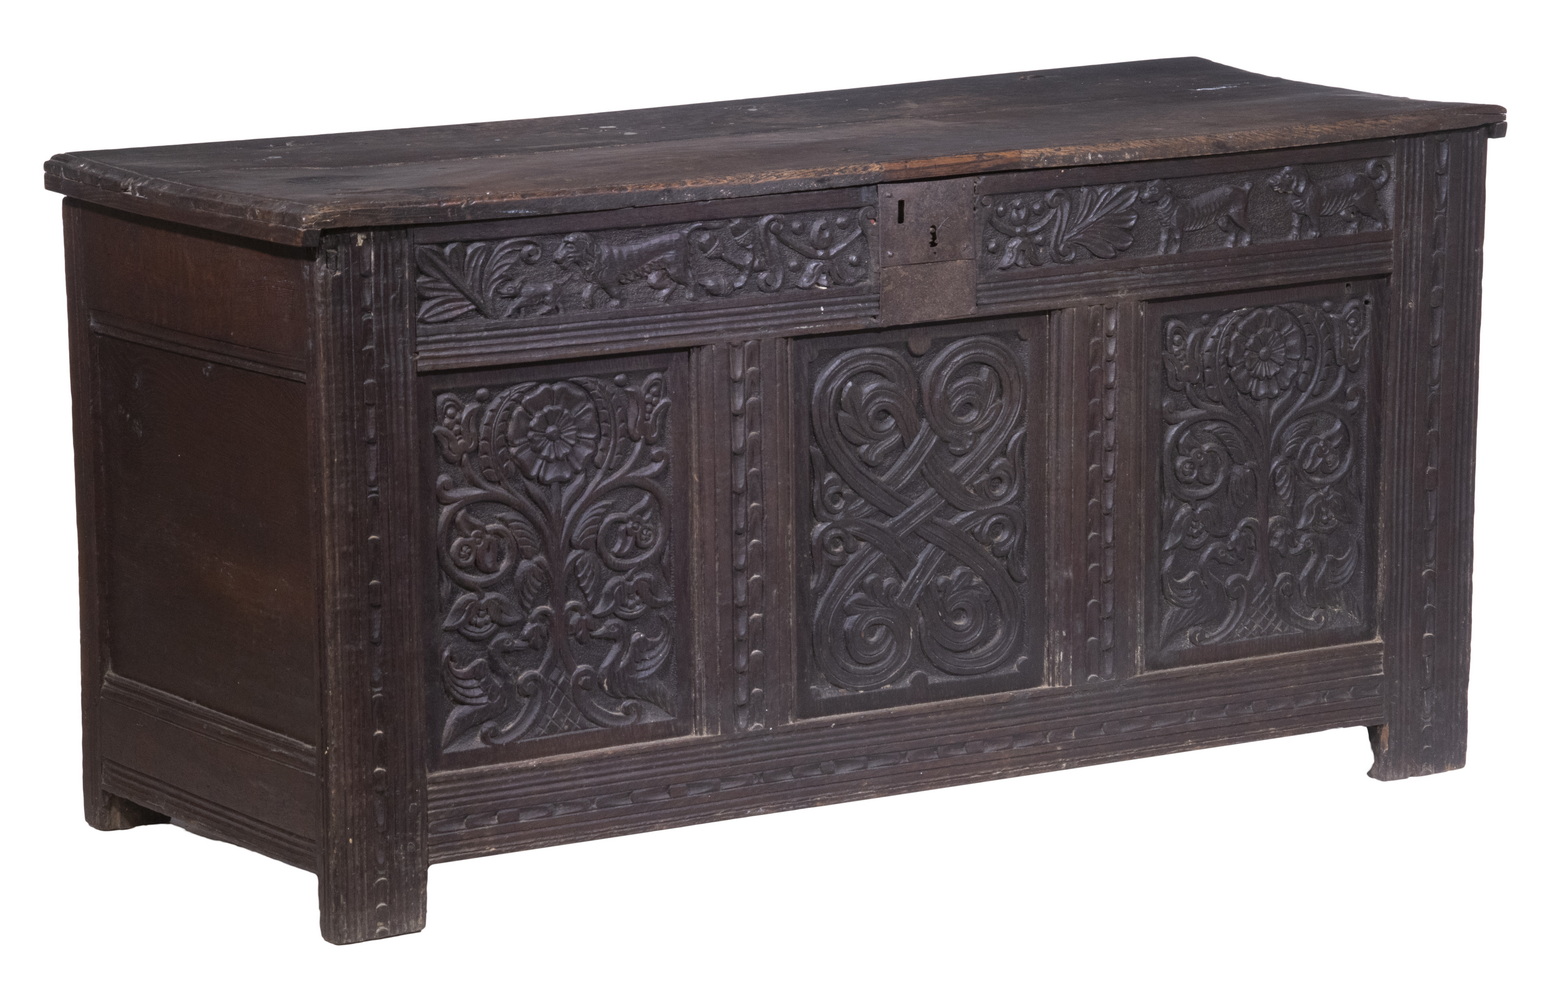 FINELY CARVED EARLY ENGLISH OAK